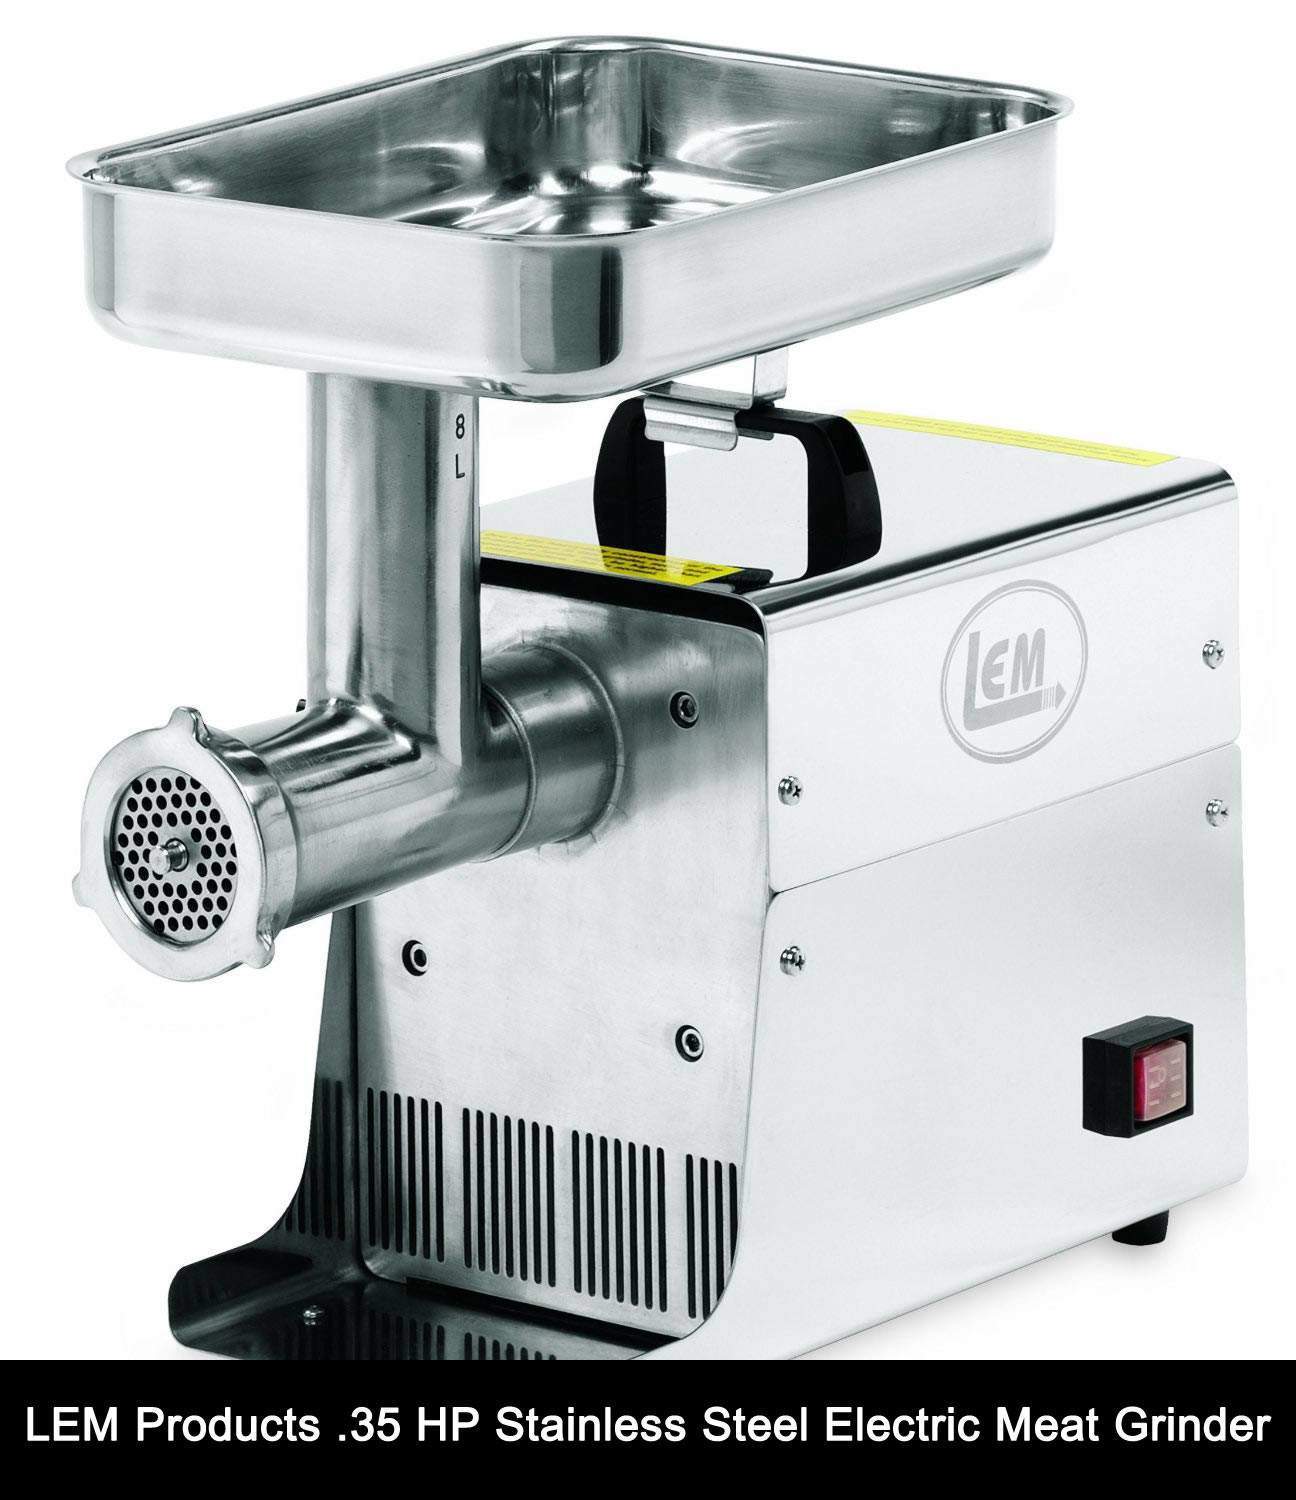 LEM Products .35 HP Stainless Steel Electric Meat Grinder review